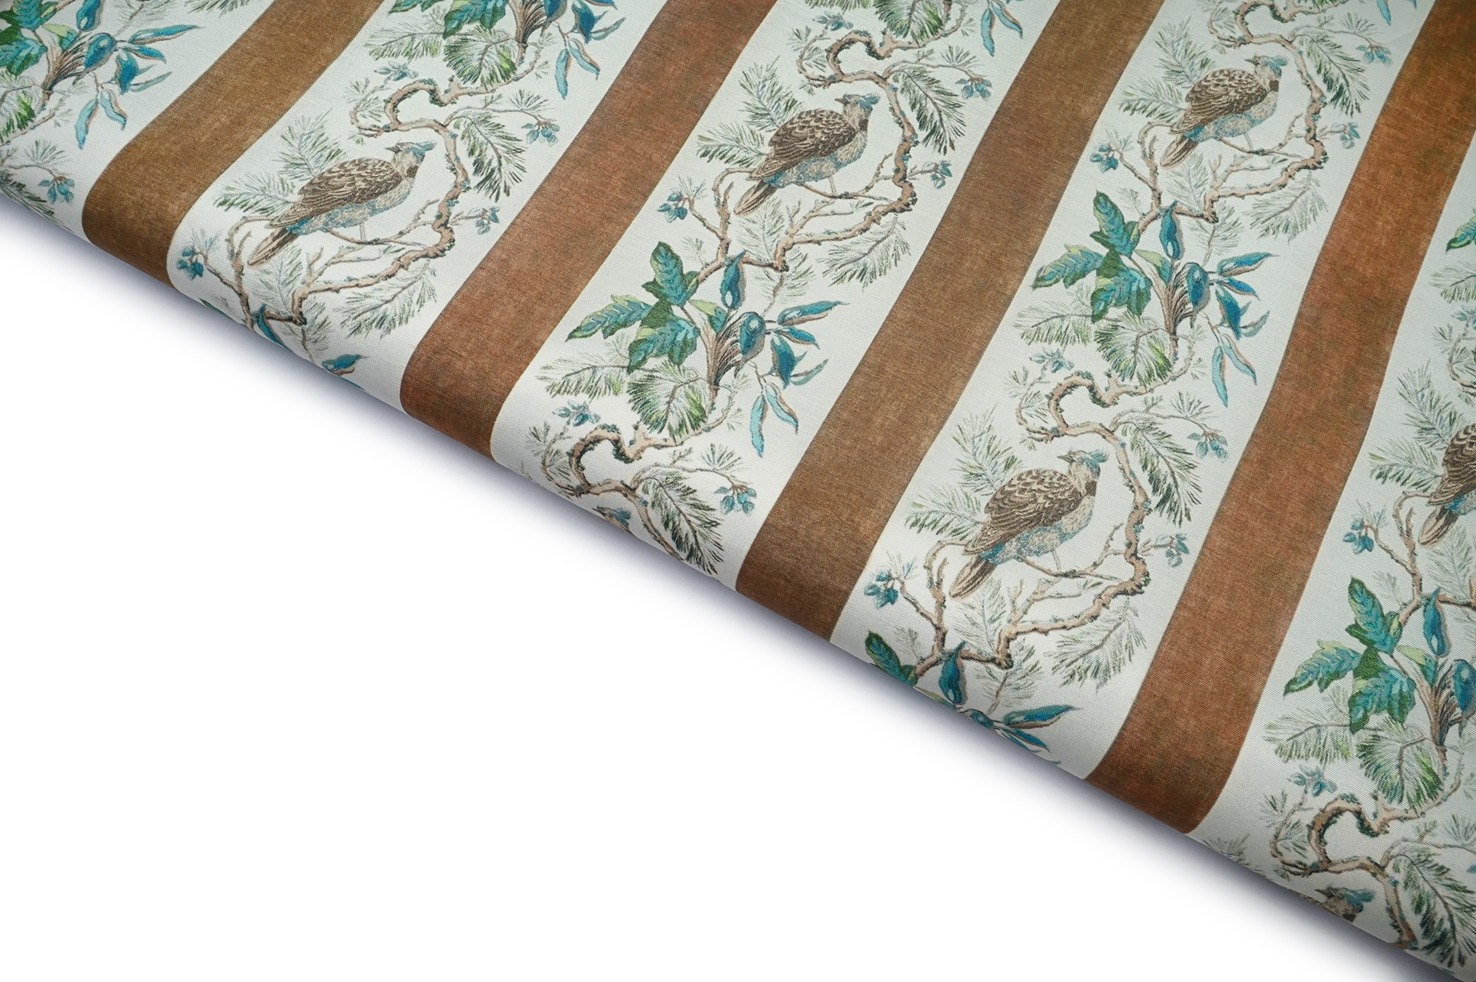 SAND BAIGE BROWN  COLOR  DIGITAL  PEACOCK  FIGURE WITH BRANCHES BELT PATTERN MUSLIN SILK PRINT FABRIC 10594